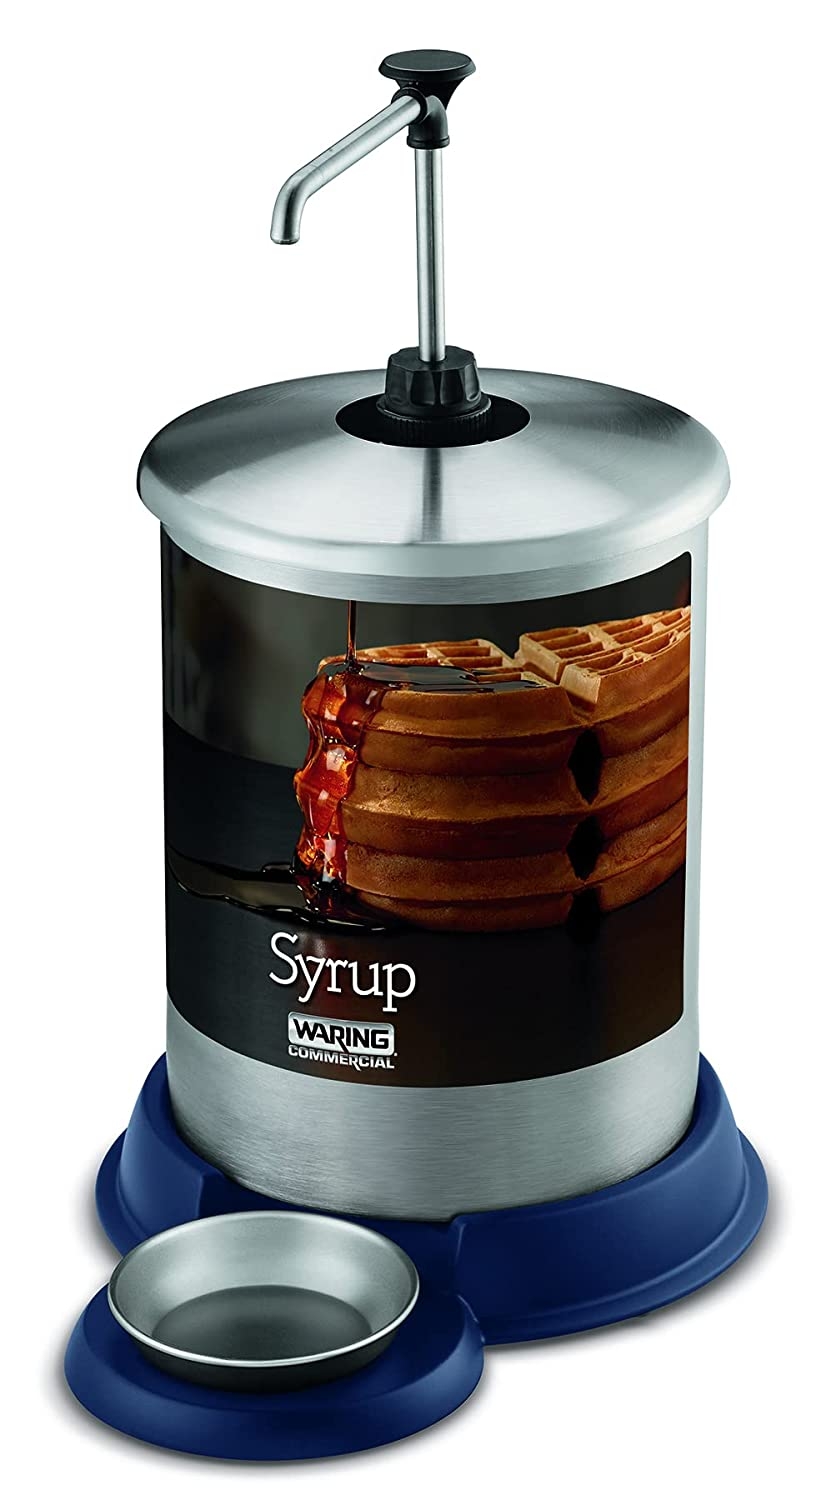 Waring Commercial WSD1G 1 Gallon Waffle, Pancake and Crepe Batter Dispenser Import To Shop ×Product customization General